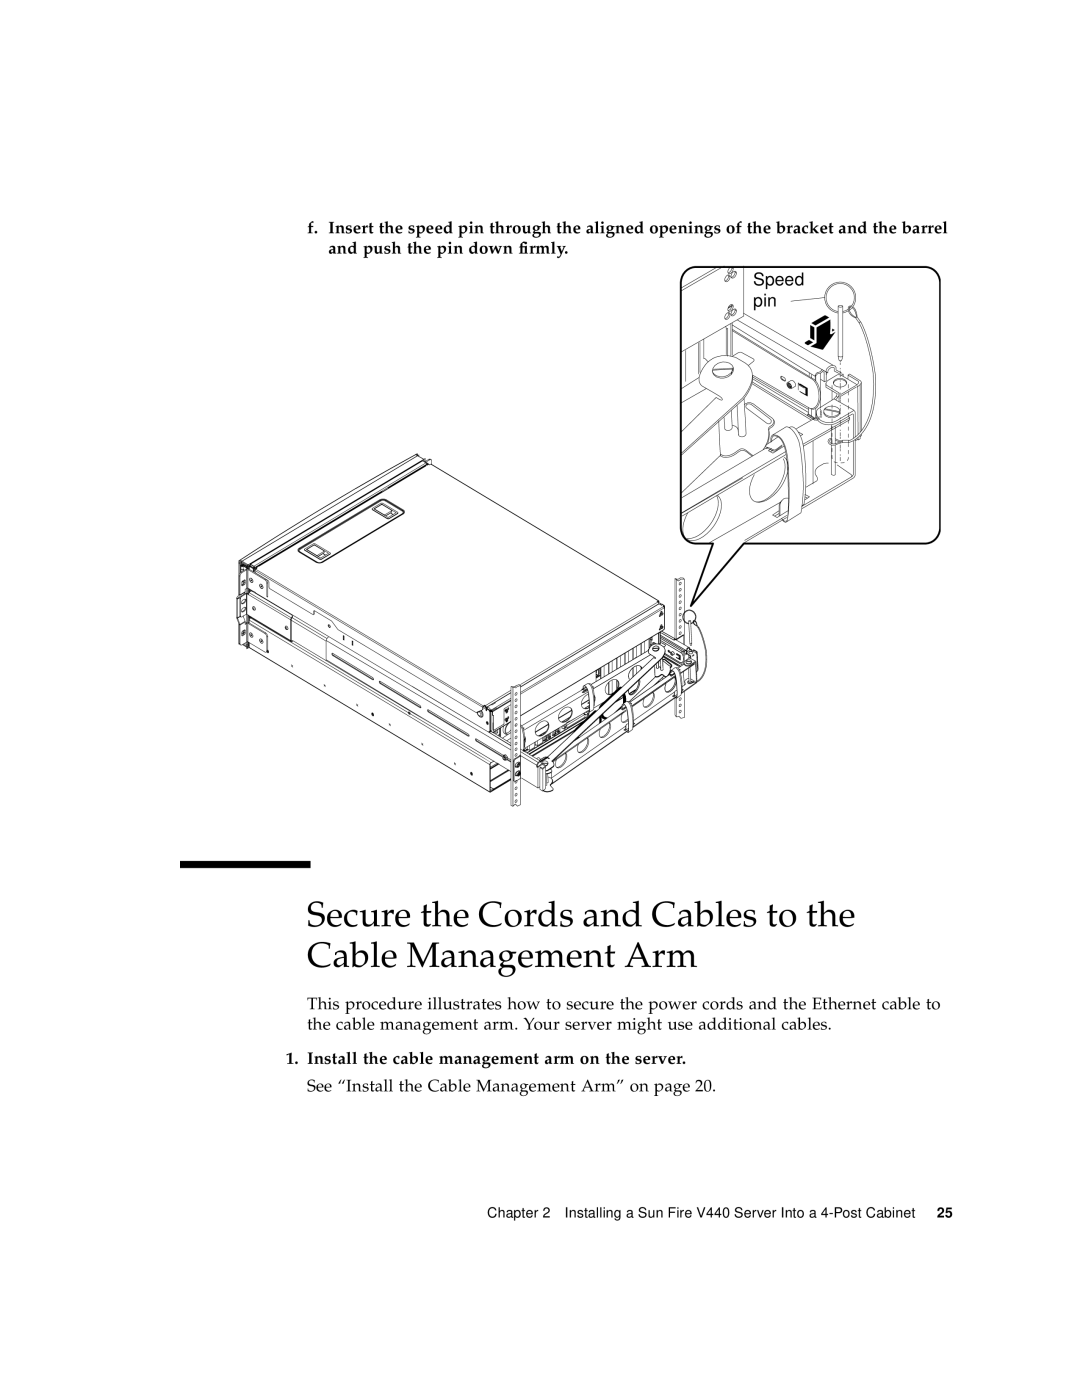 Sun Microsystems 816-7727-10 manual Secure the Cords and Cables to the Cable Management Arm, Speed pin 